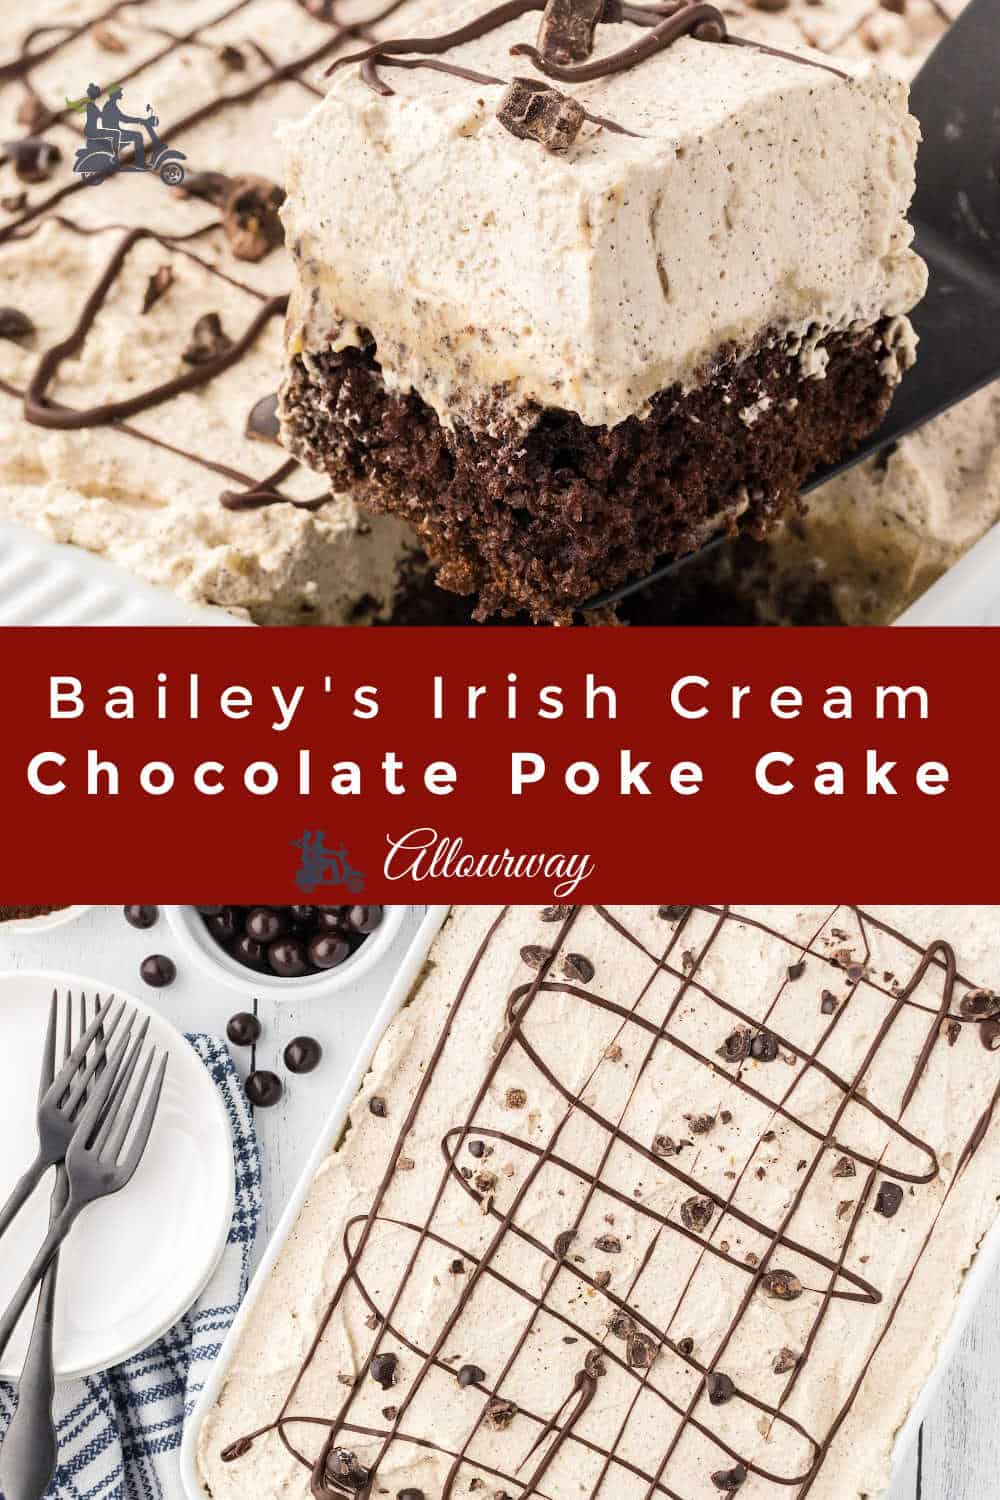 If you're looking for a delicious dessert that will impress all your friends and family, this Bailey's Irish Cream Chocolate Poke Cake made with Chocolate Cake Mis and Vanilla Pudding will do it. This decadent treat combines the rich flavors of dark chocolate and Bailey's Irish Cream with a moist and fluffy cake base. It's easy to make, and this dessert will have everyone asking for your secret recipe.